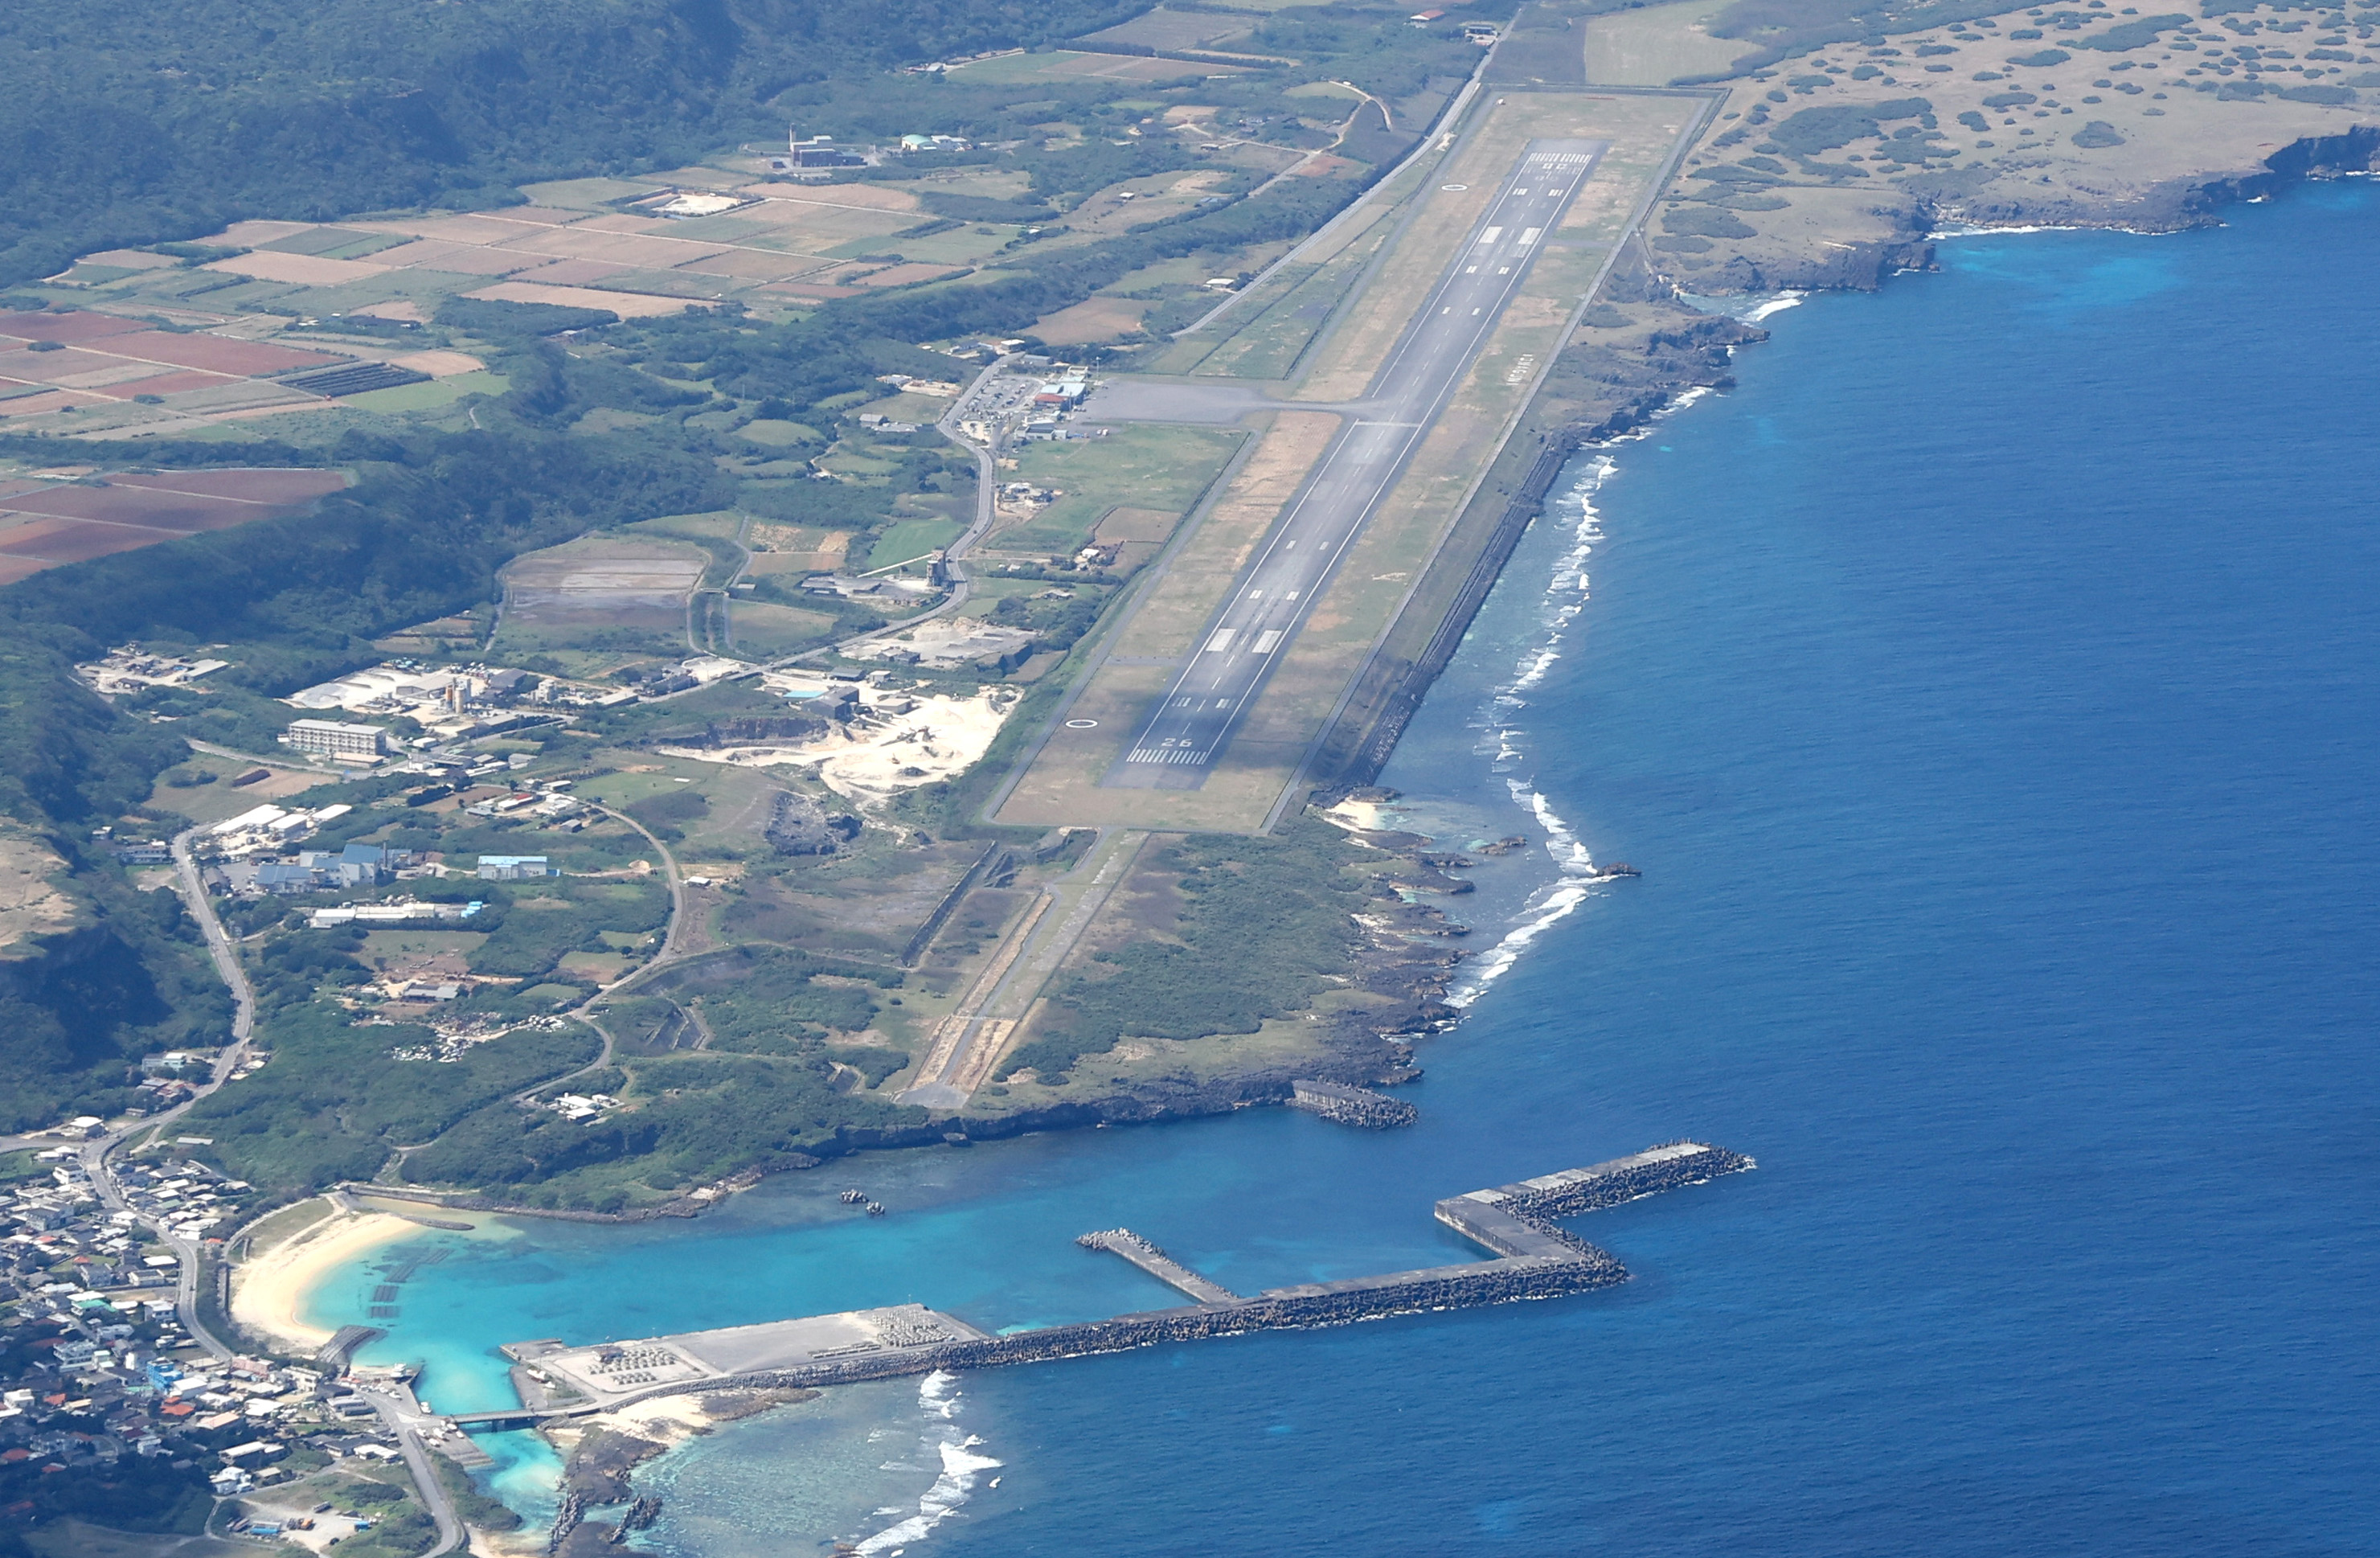 An overhead of a US military base on a small Japanese island in Okinawa